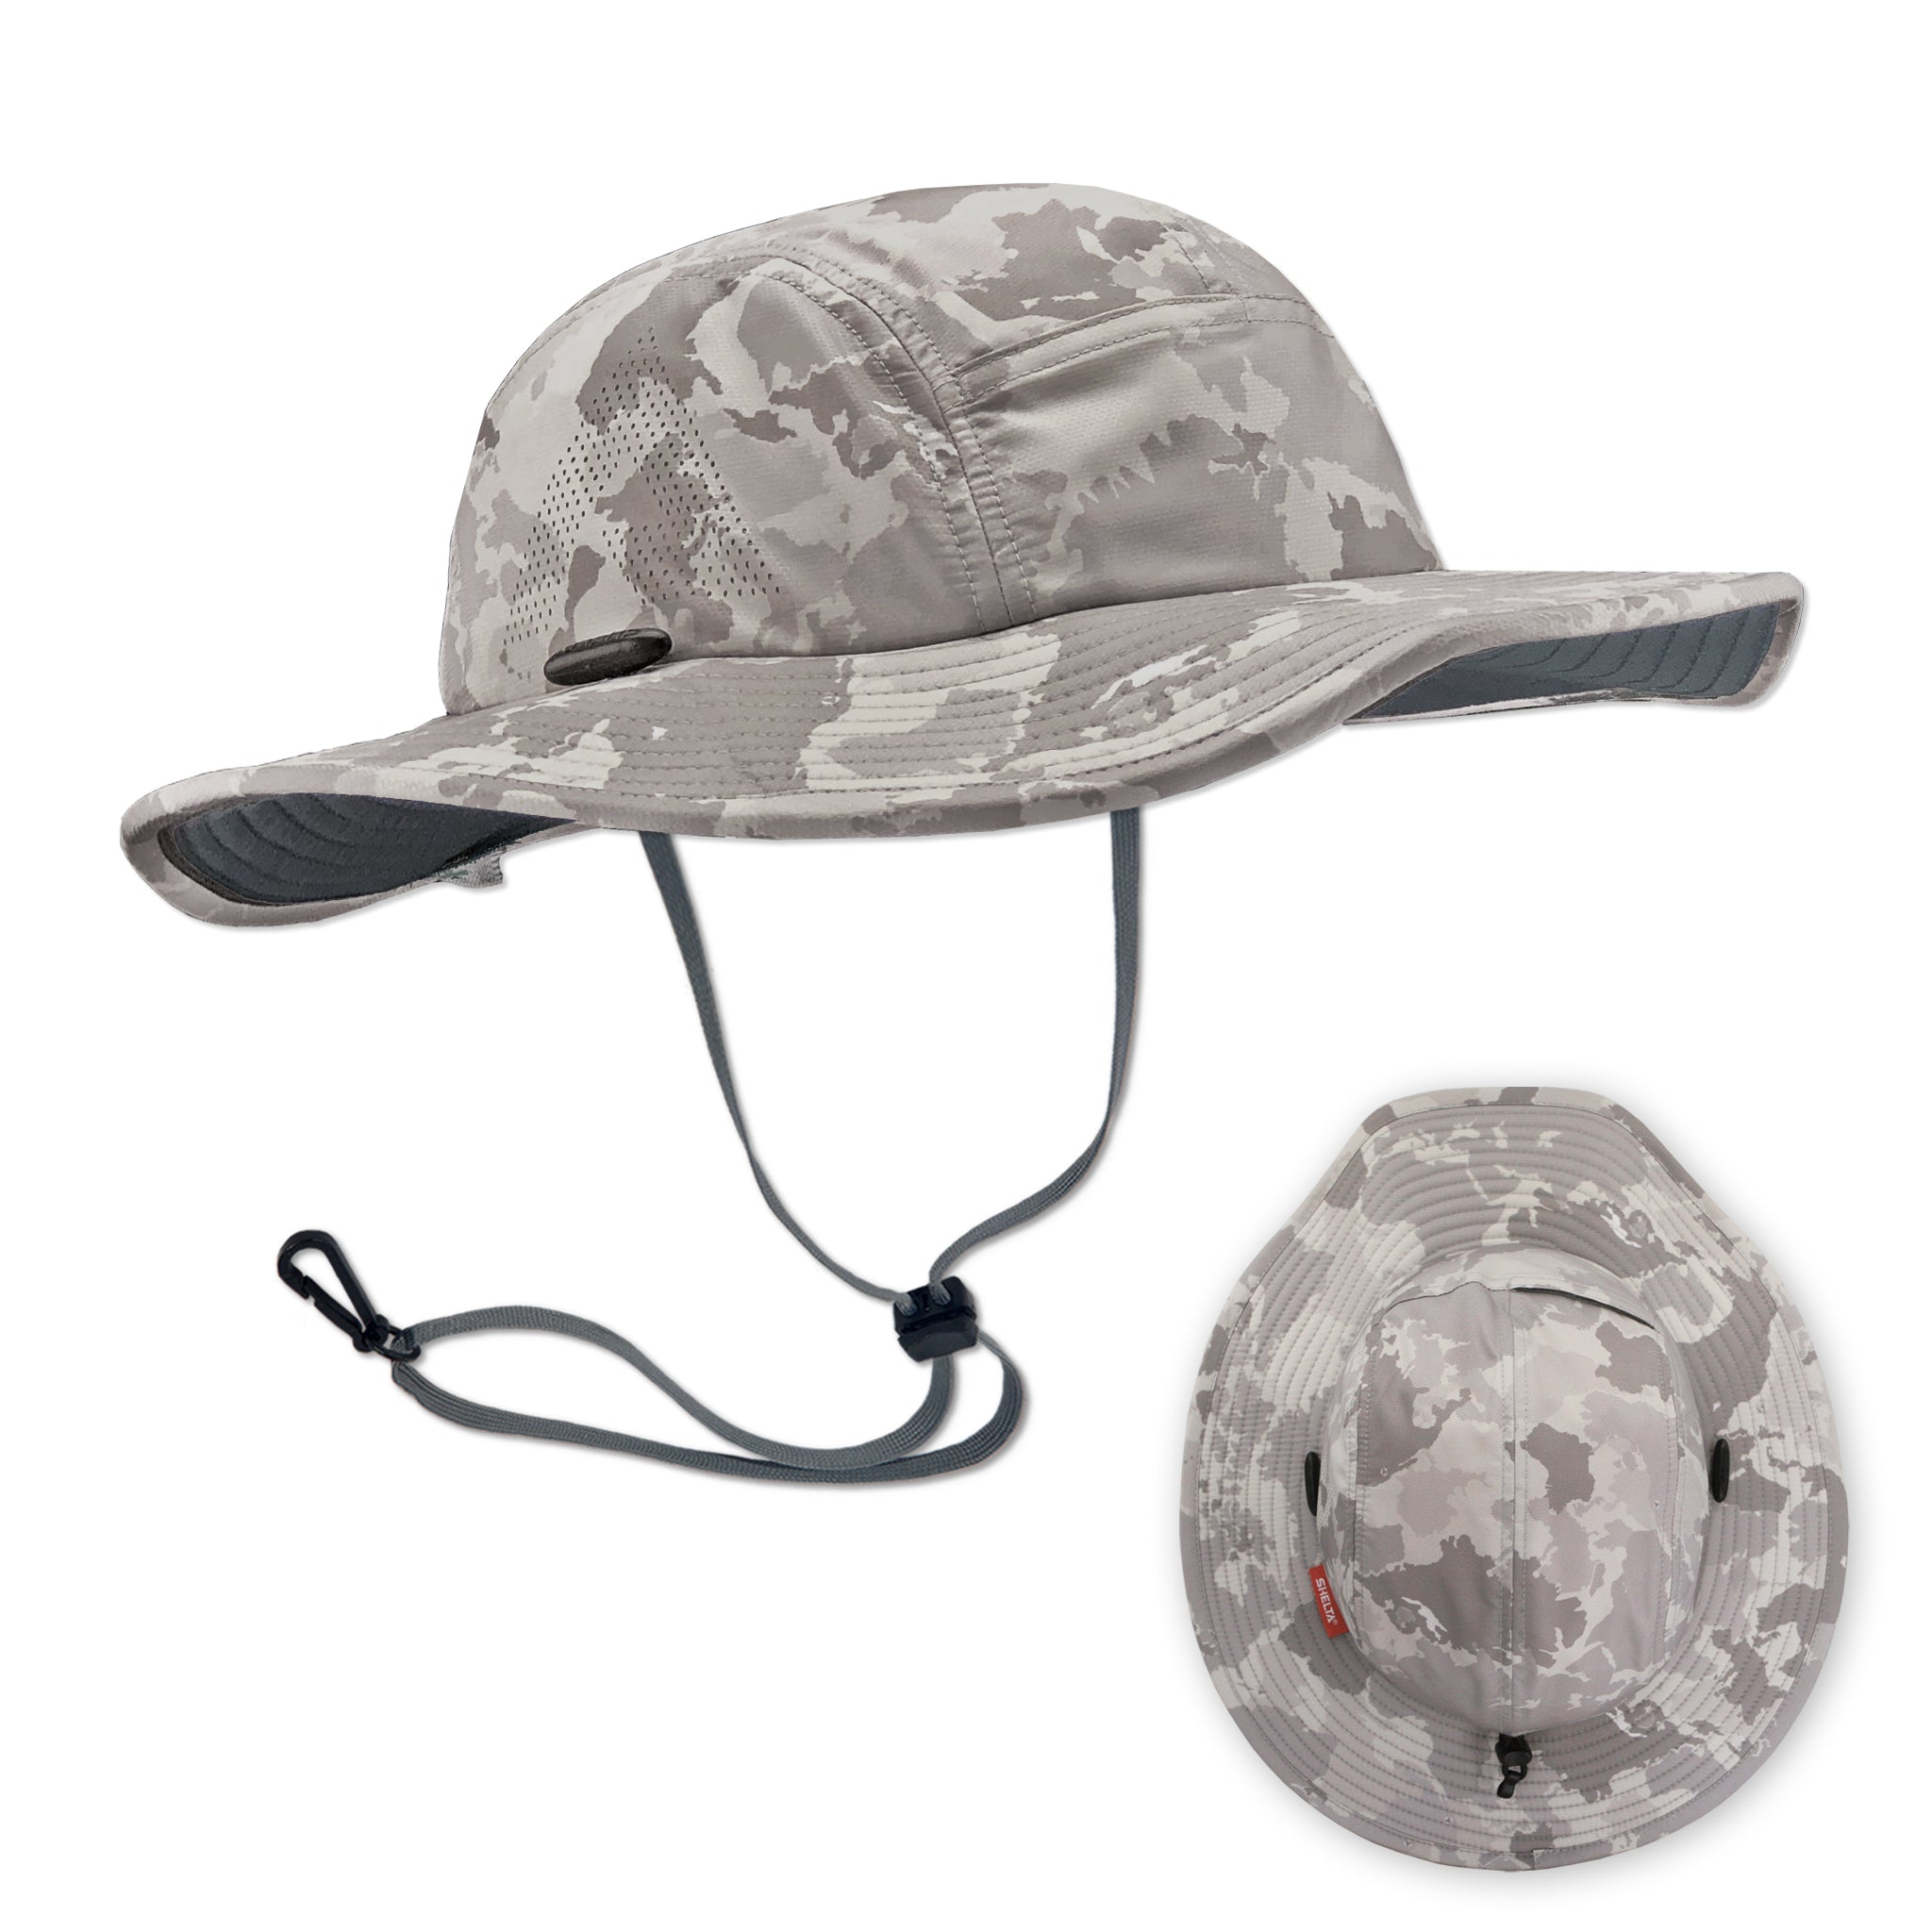 50 UPF UV Sun Protection Fishing Hat that Floats. Simply the best